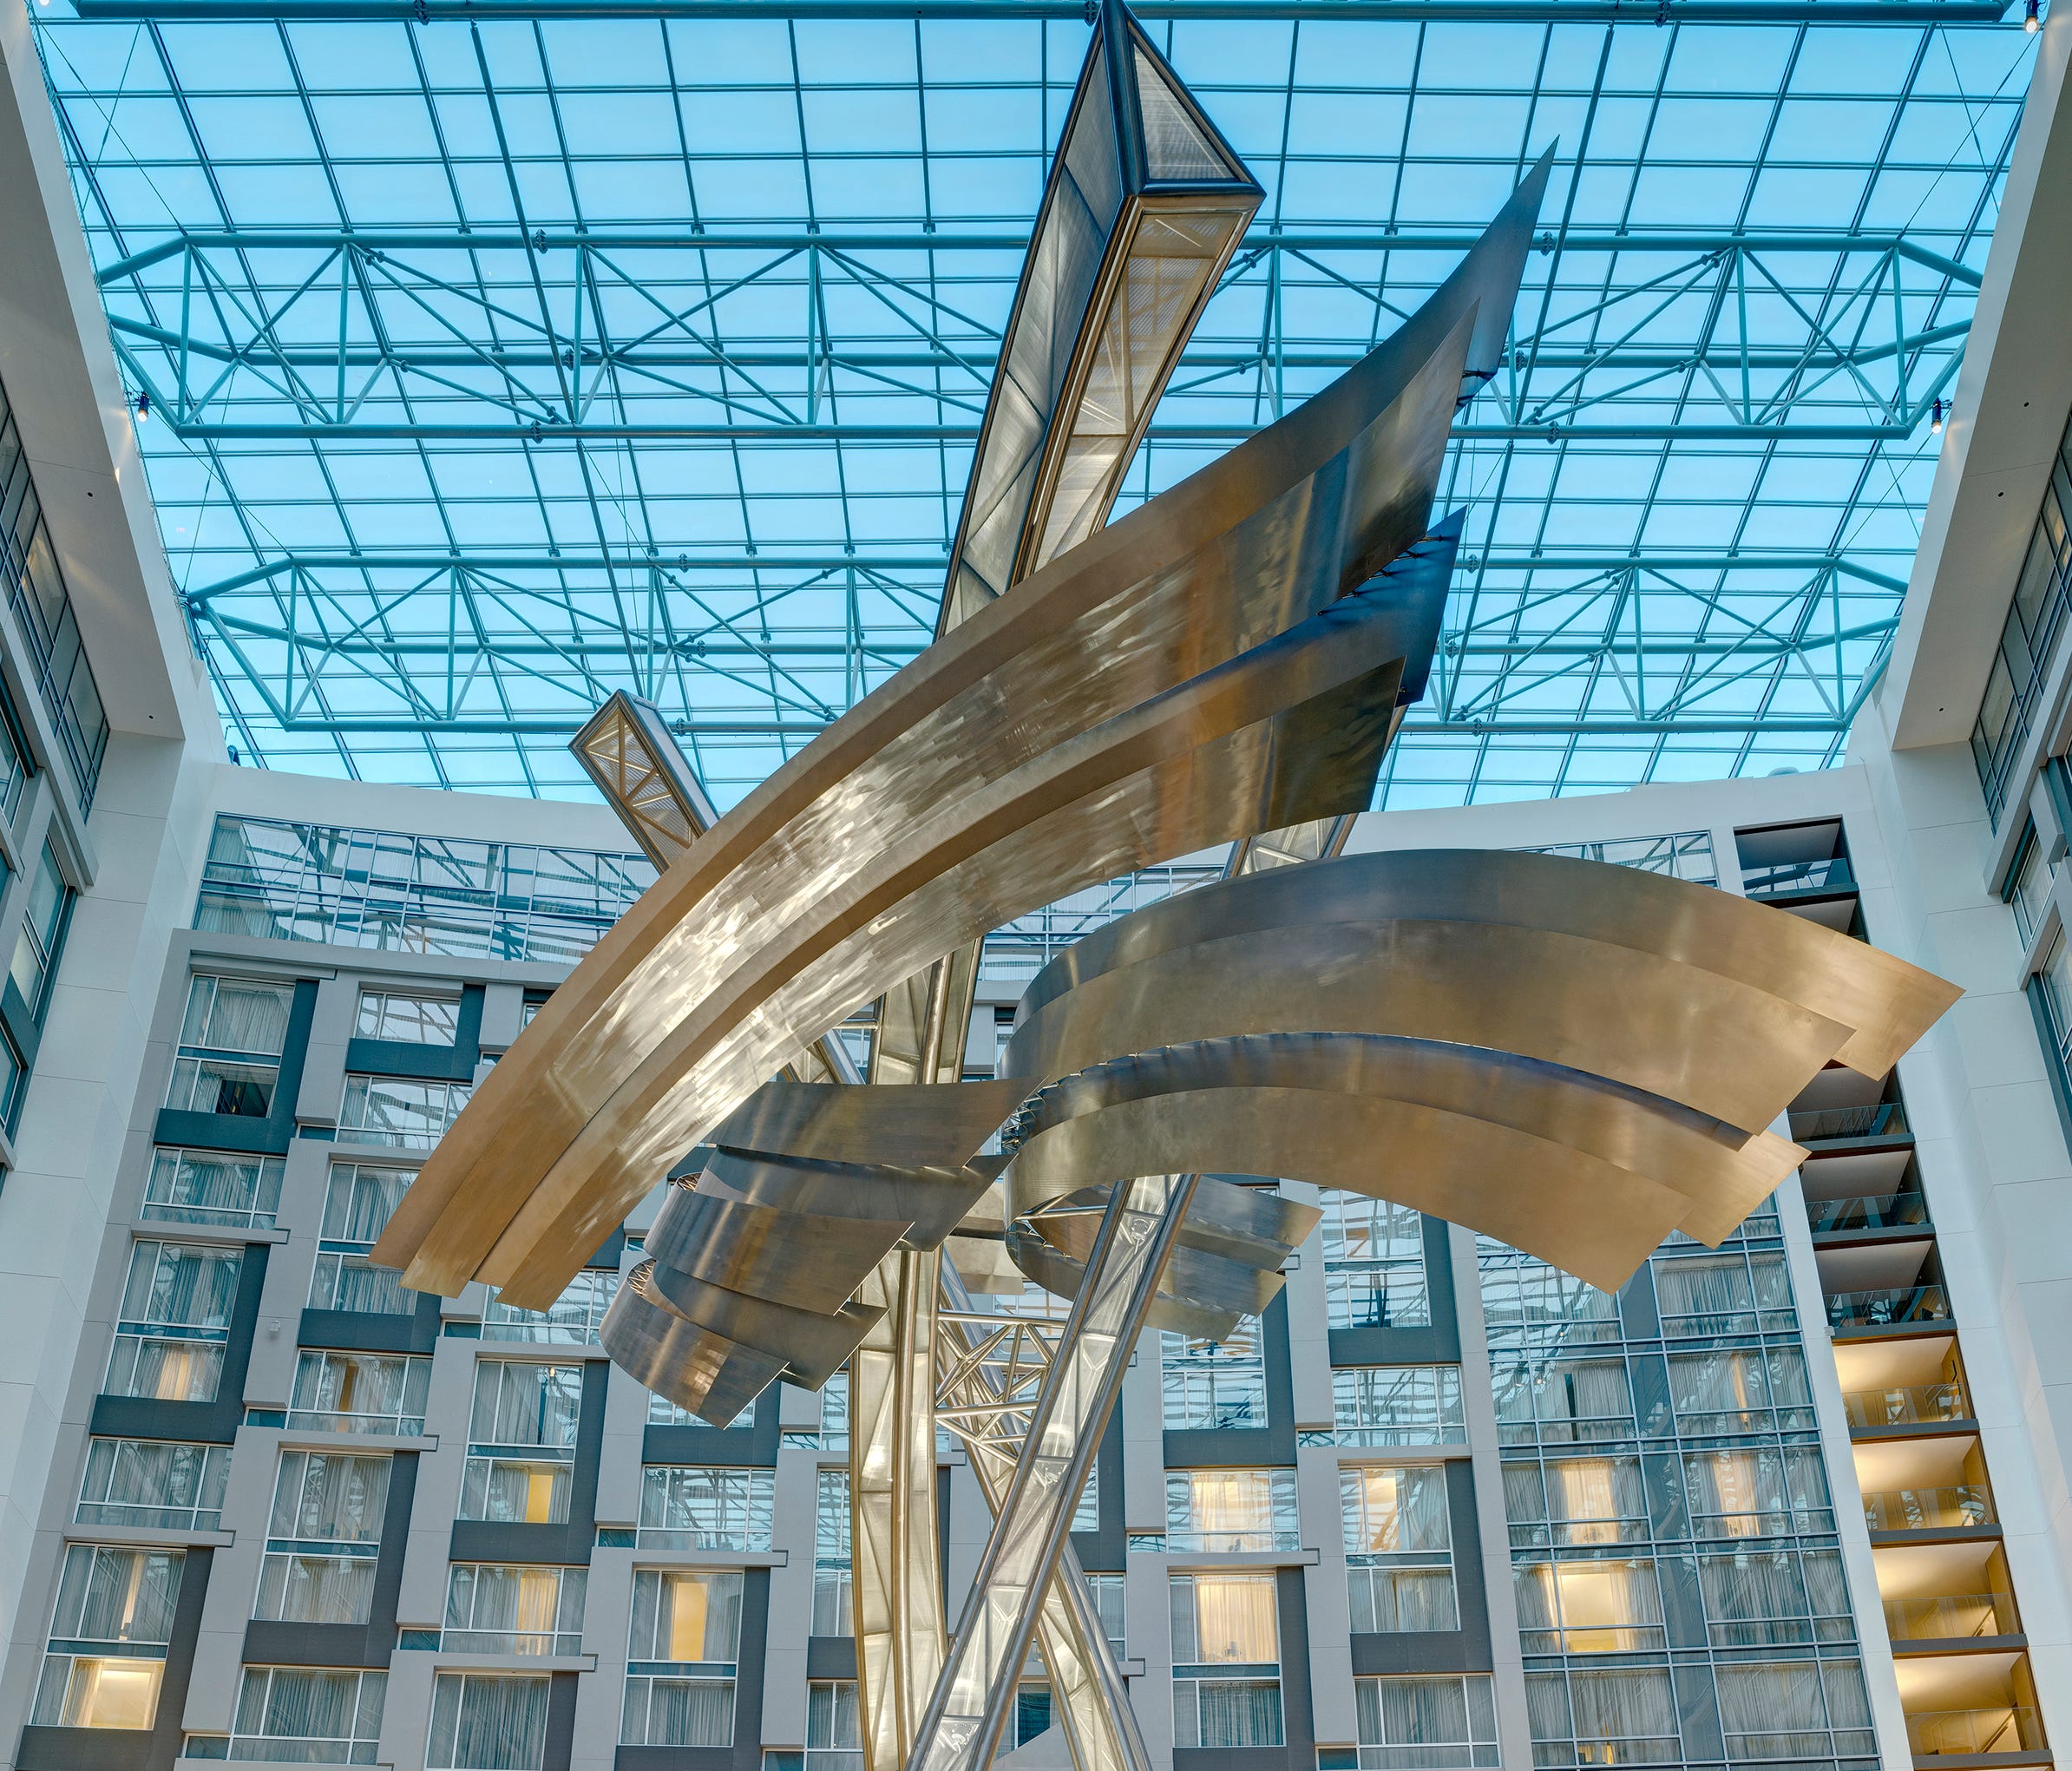 The Marriott Marquis Washington D.C. is one of the most in demand hotels in the city, according to Expedia.